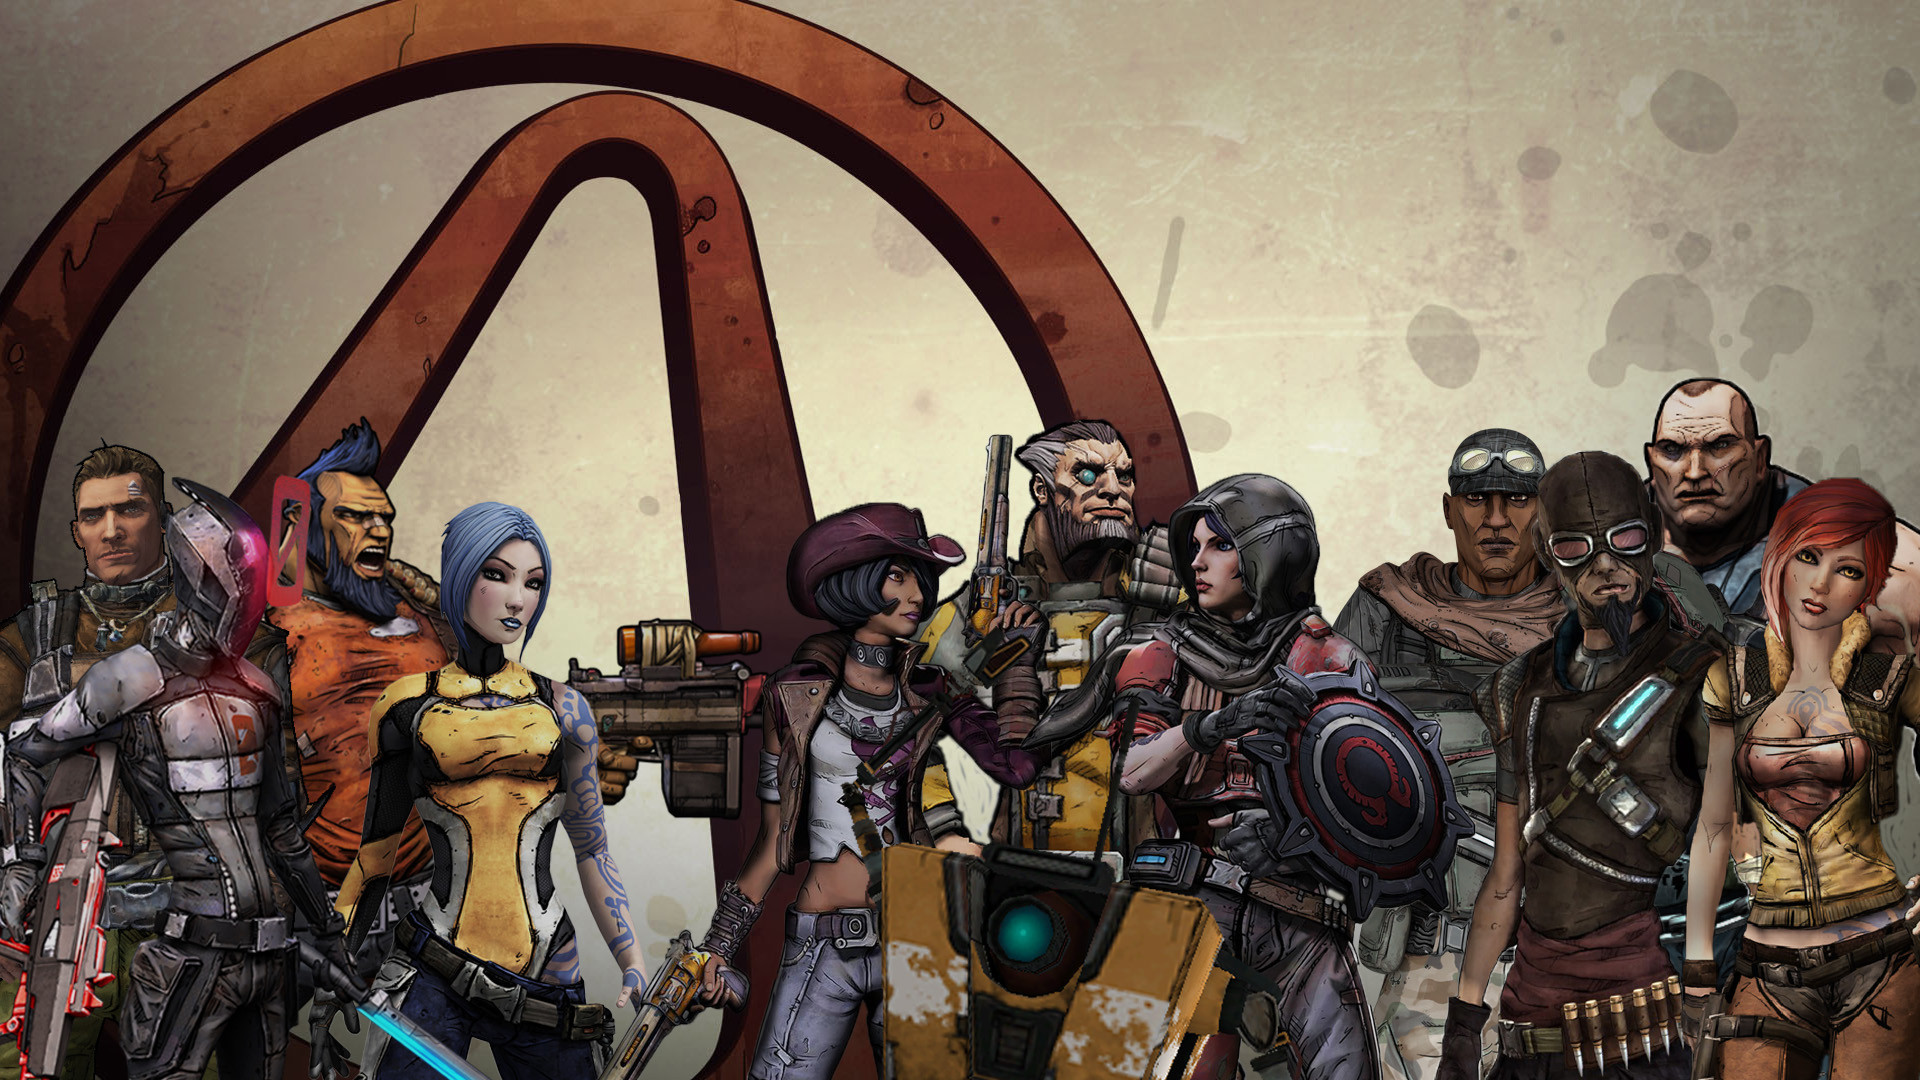 1920x1080 Represent Your Borderlands 2 Character With Some Fancy Wallpaper